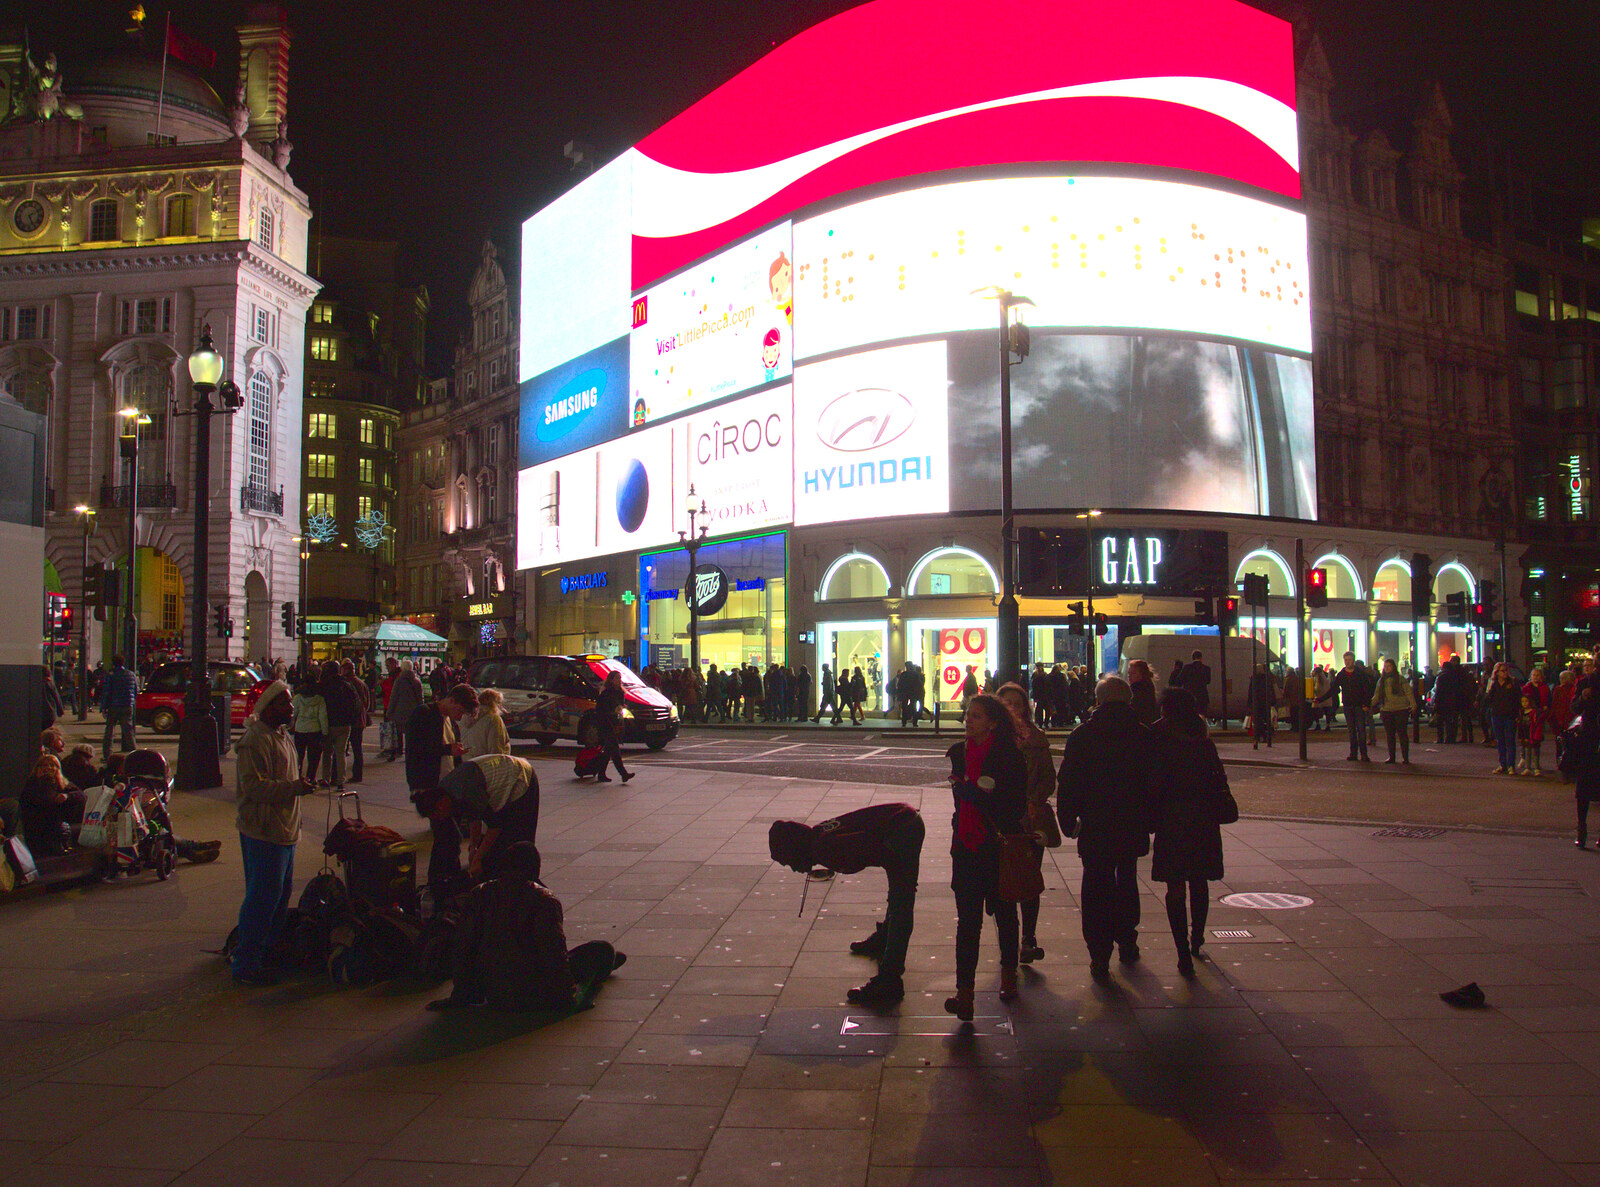 Picadilly Circus from SwiftKey Innovation Nights, Westminster, London - 19th December 2014